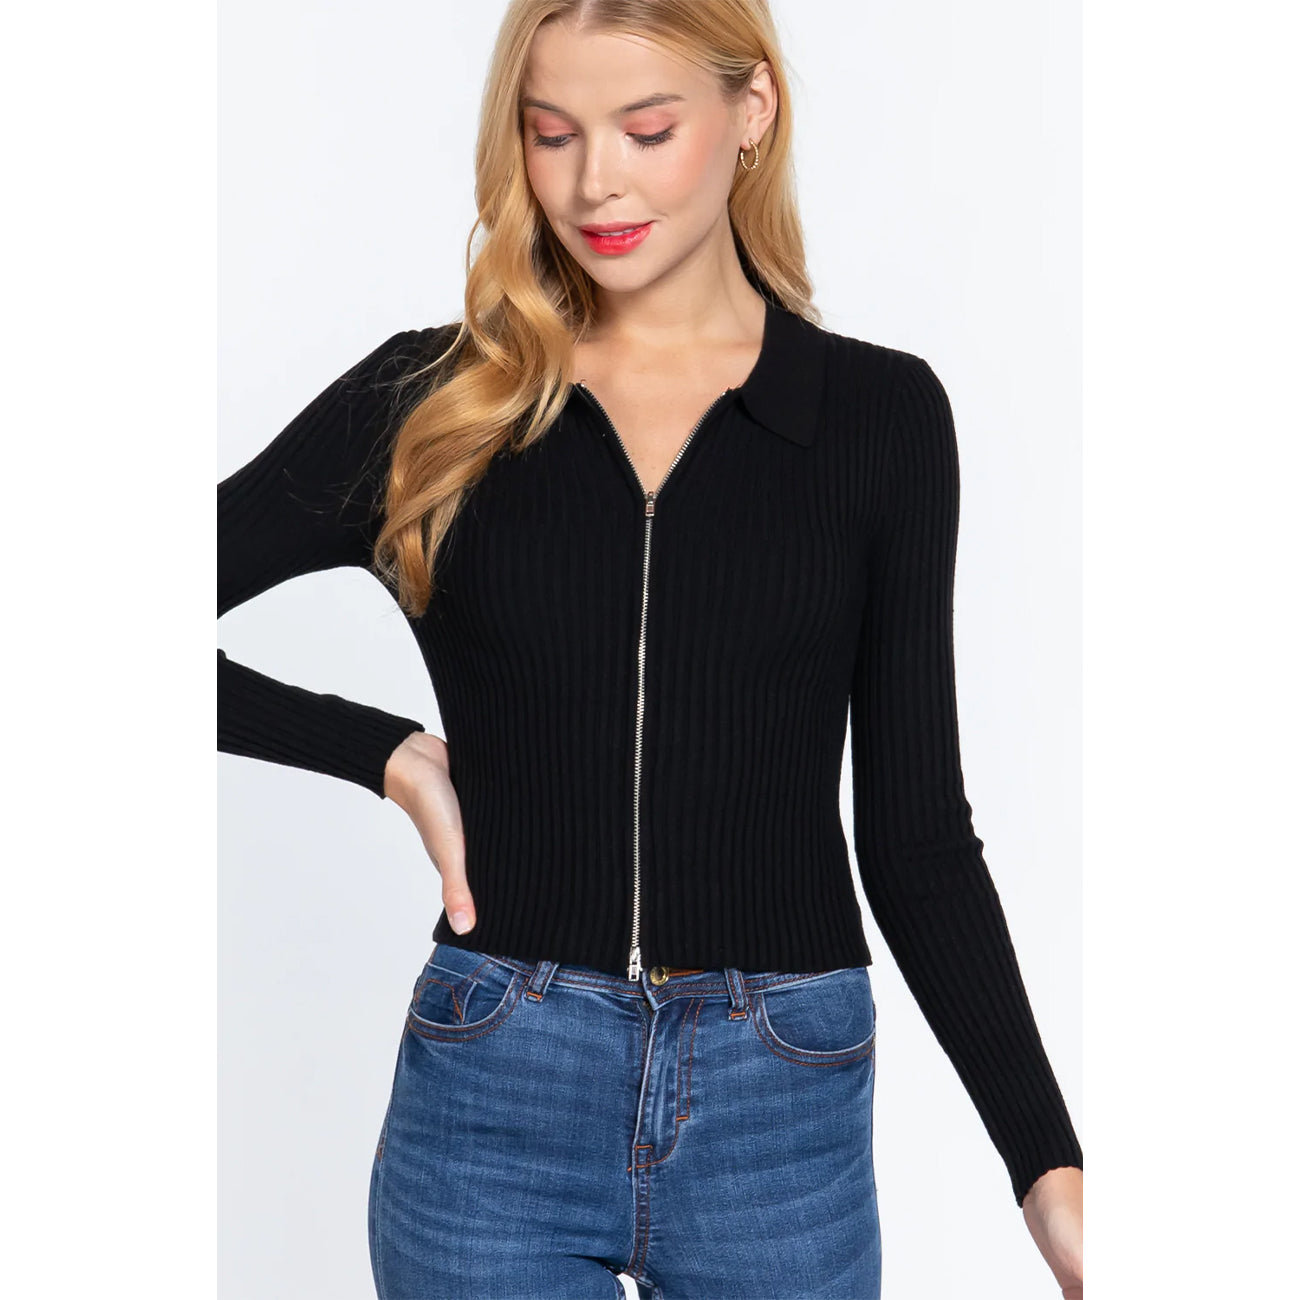 Notched Collar Zippered Sexy Women's Sweater